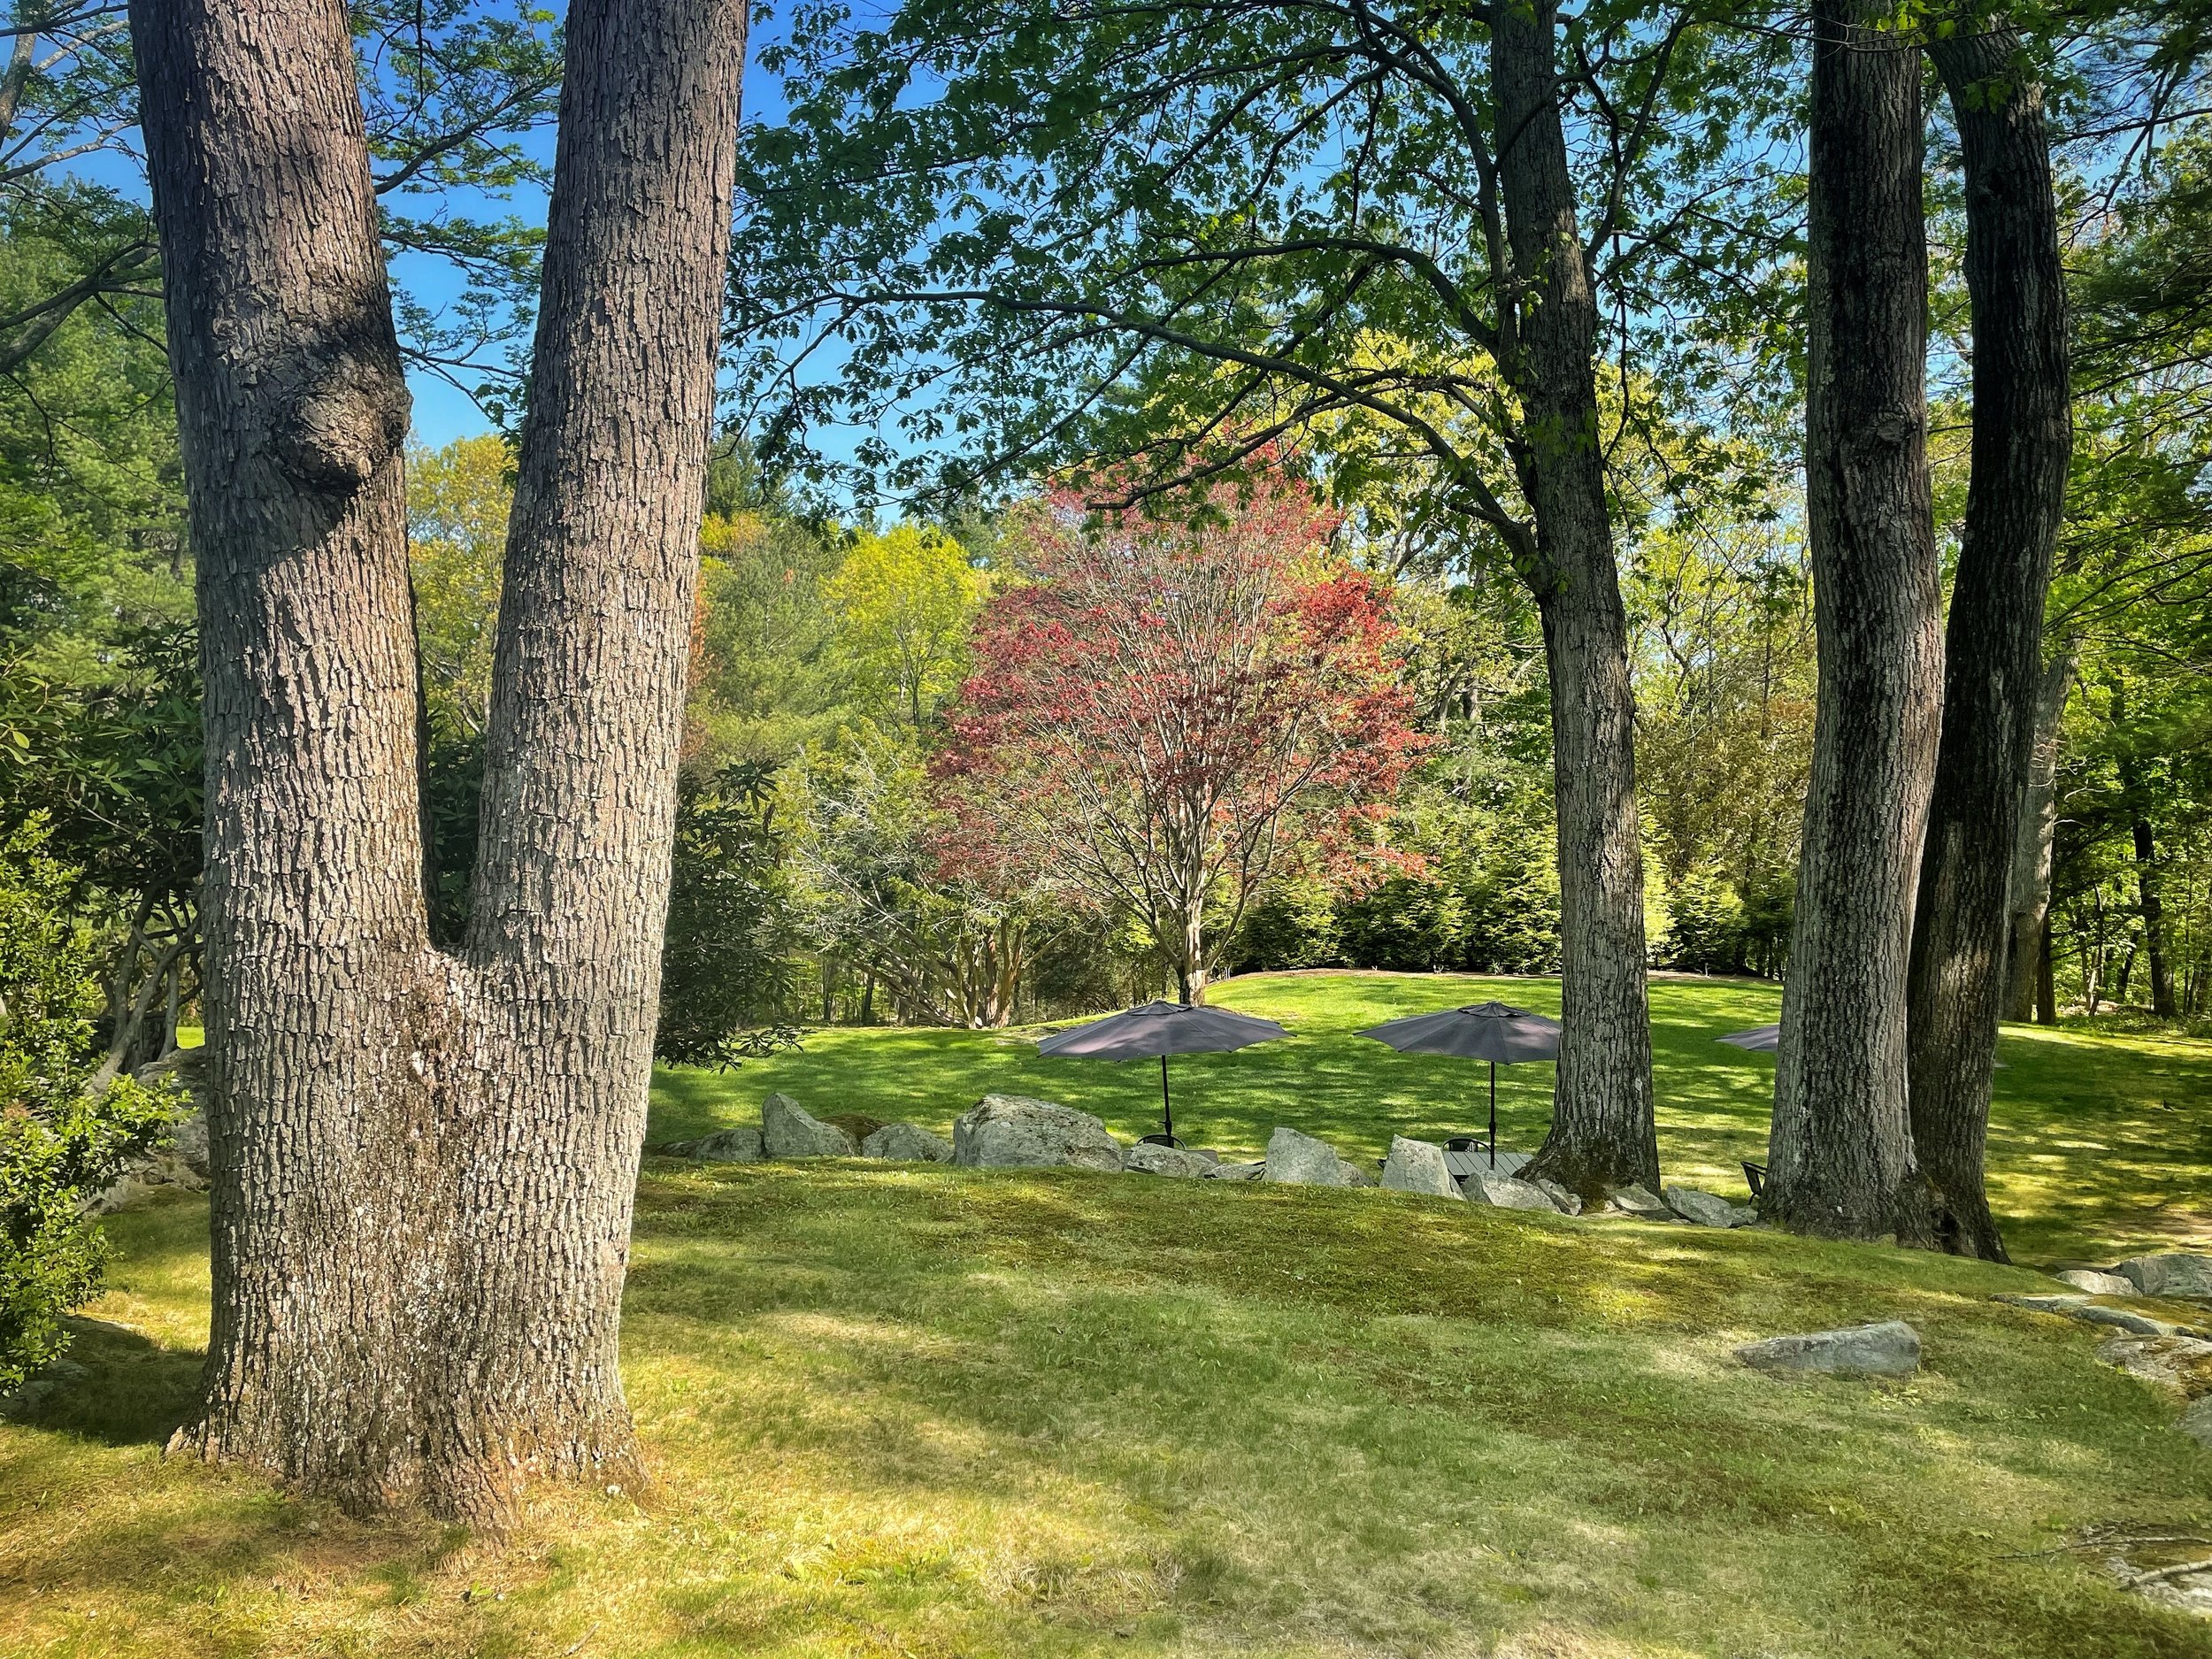 Grounds to explore at MIT Endicott House